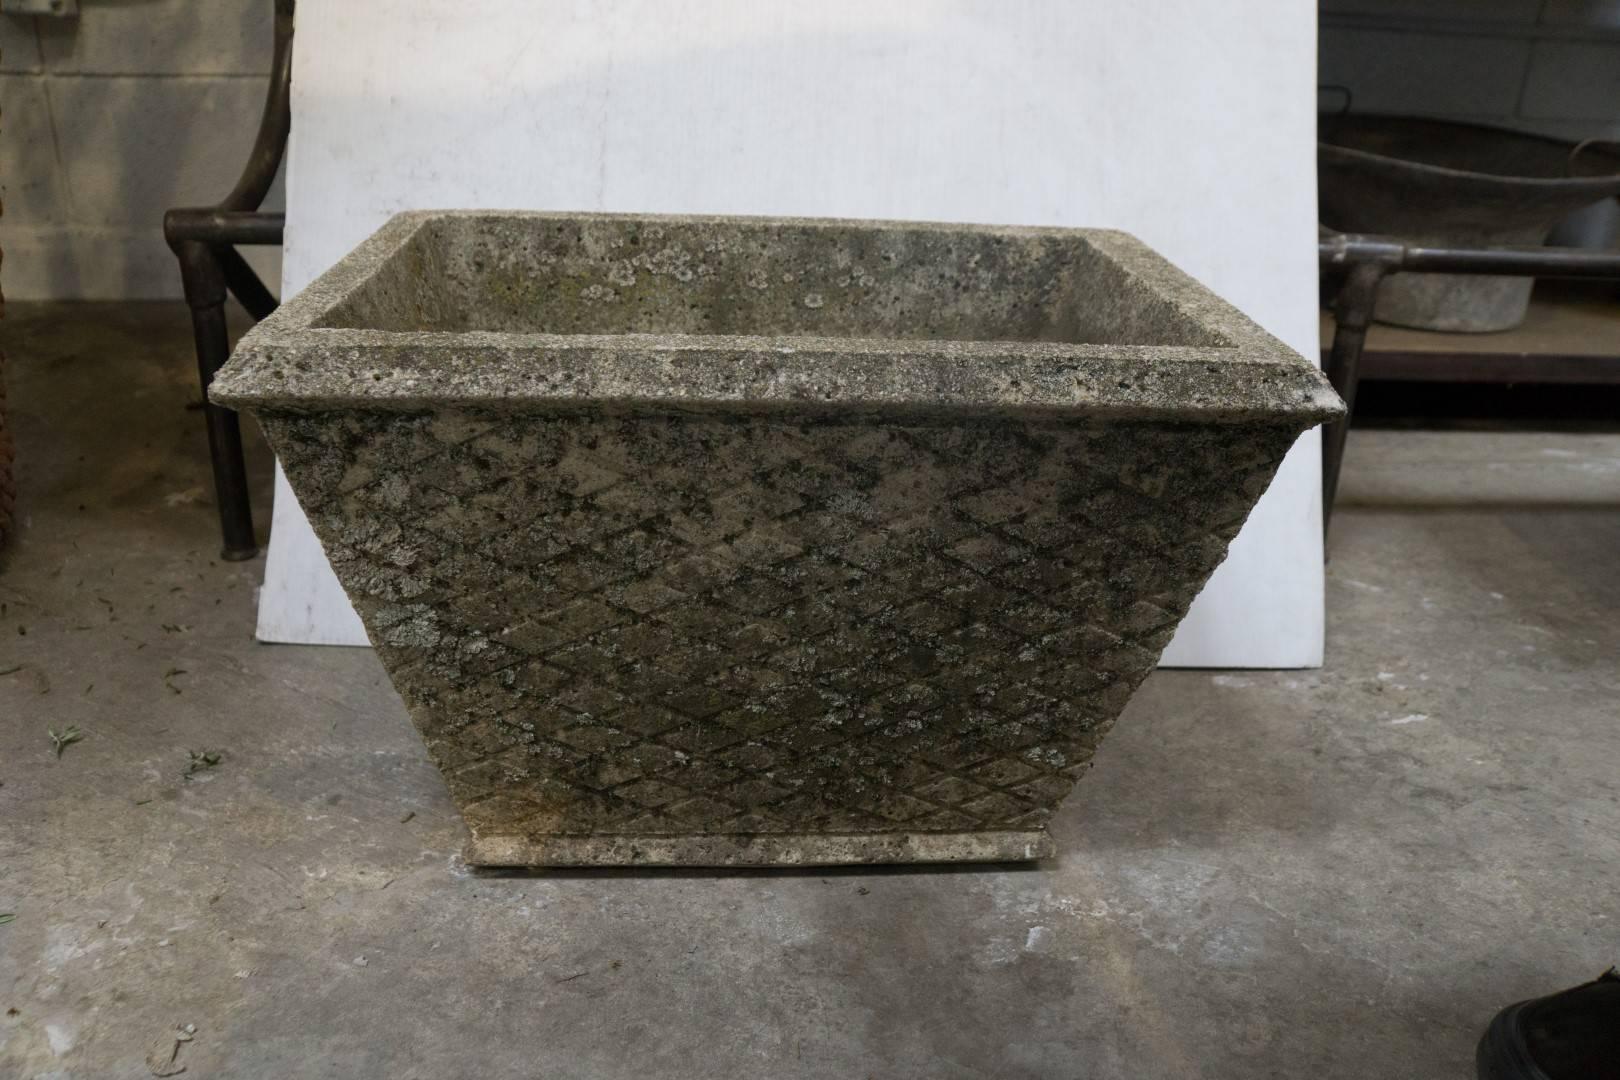 20th century French cast stone planter with intricate basket weave design
circa 1910
France
Measures: 19'' L x 13'' W x 12'' H
$450.00.